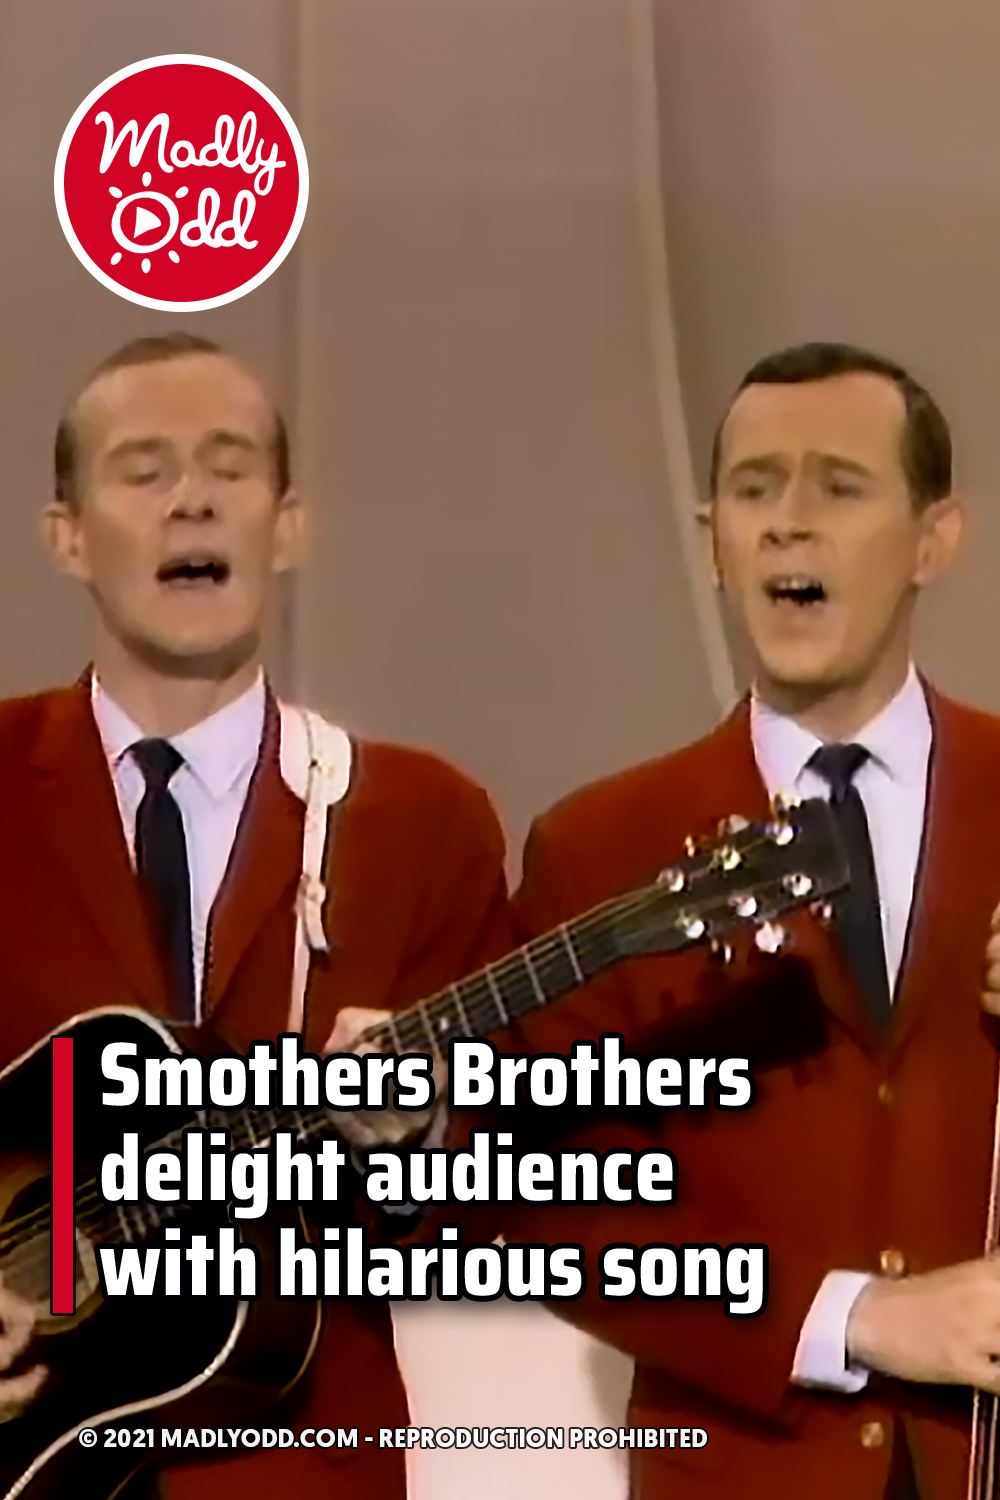 Smothers Brothers delight audience with hilarious song